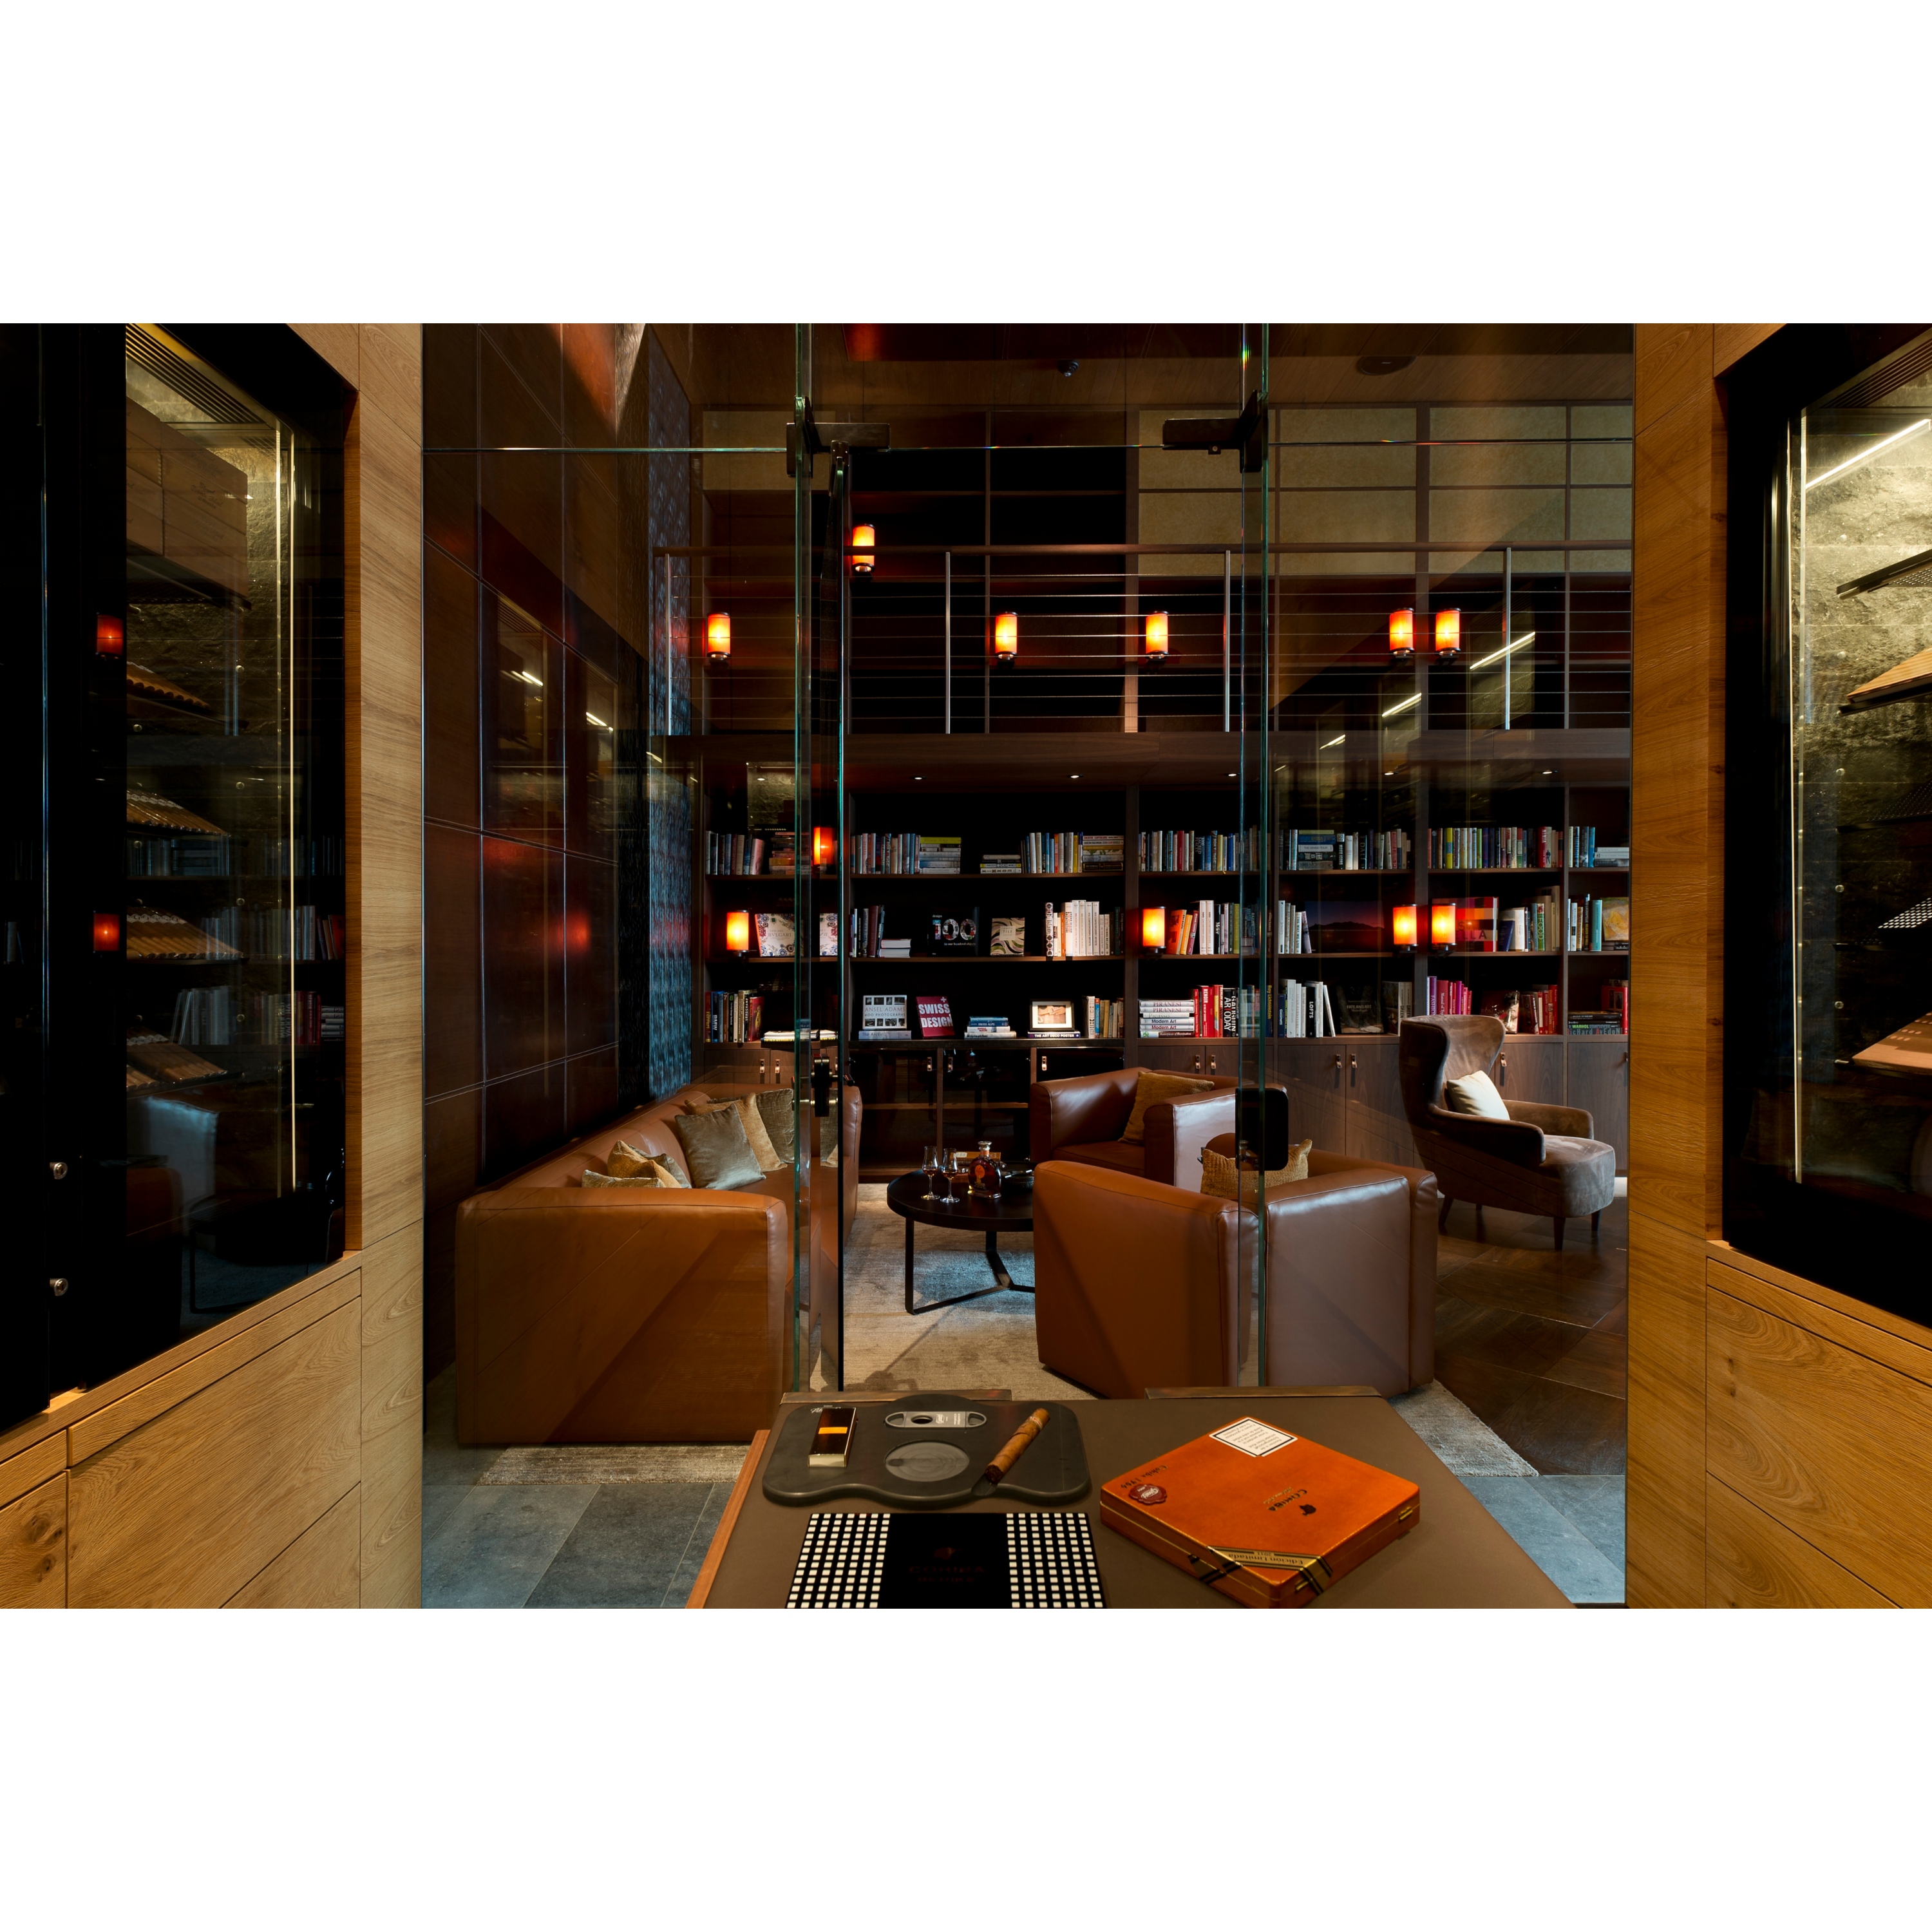 the cigar library seating area with book shelfs inside the chedi Andermatt hotel in Swiss Alps.